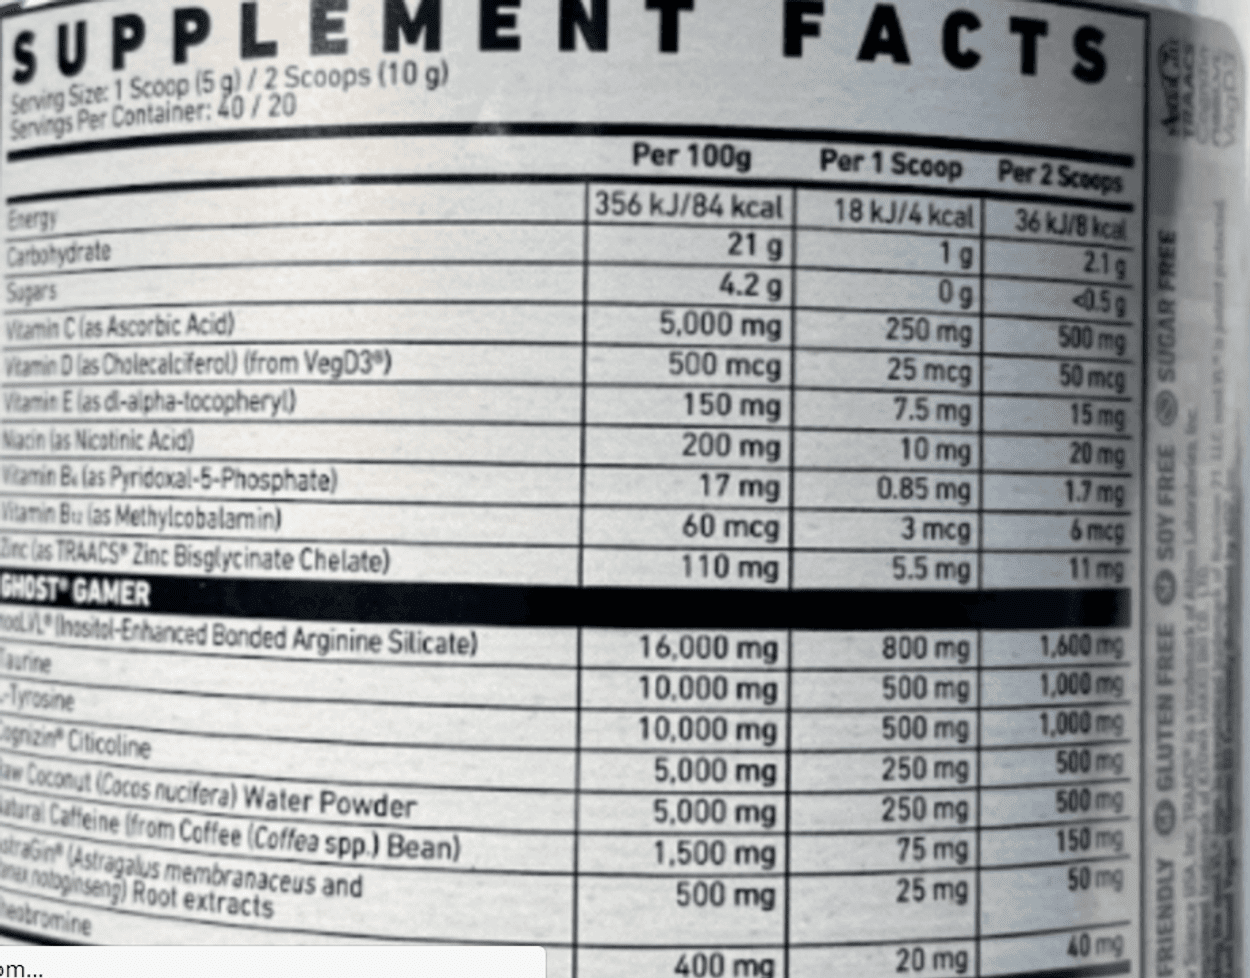 Supplement facts of Ghost Gamer.